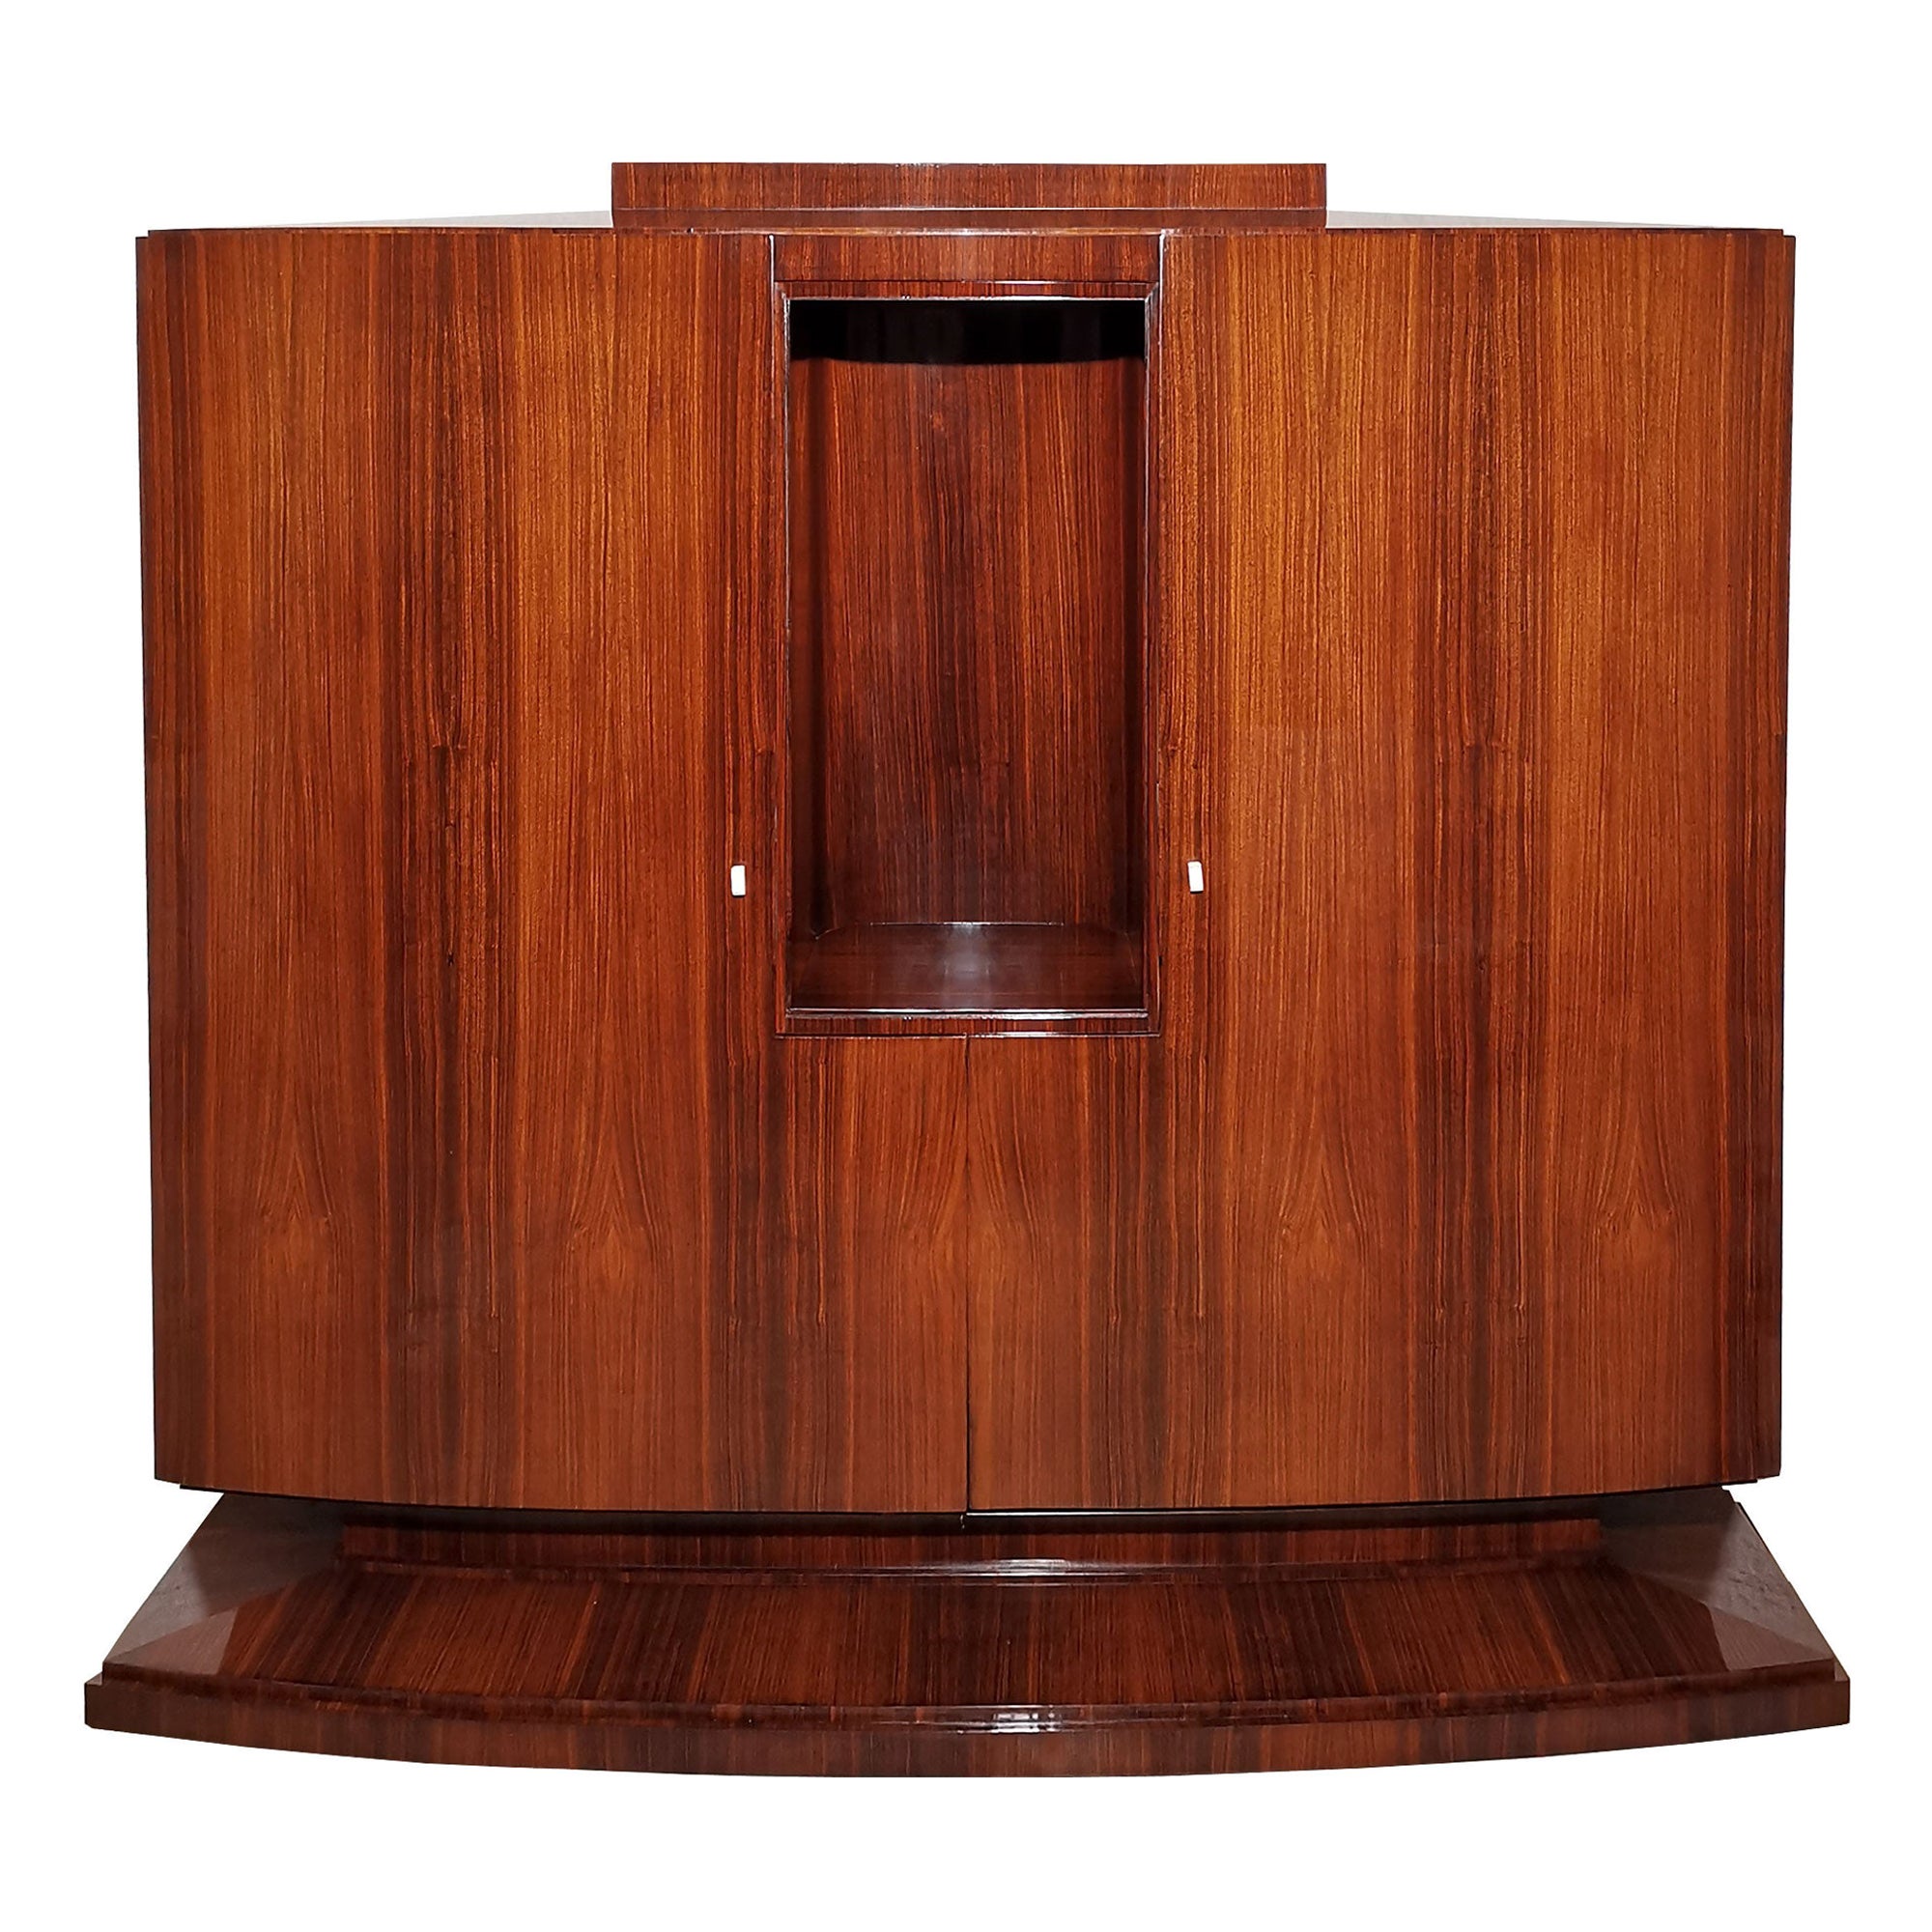 Art Deco Storage Cabinet, Mahogany, Sycamore, Curved Doors, Shelves, France